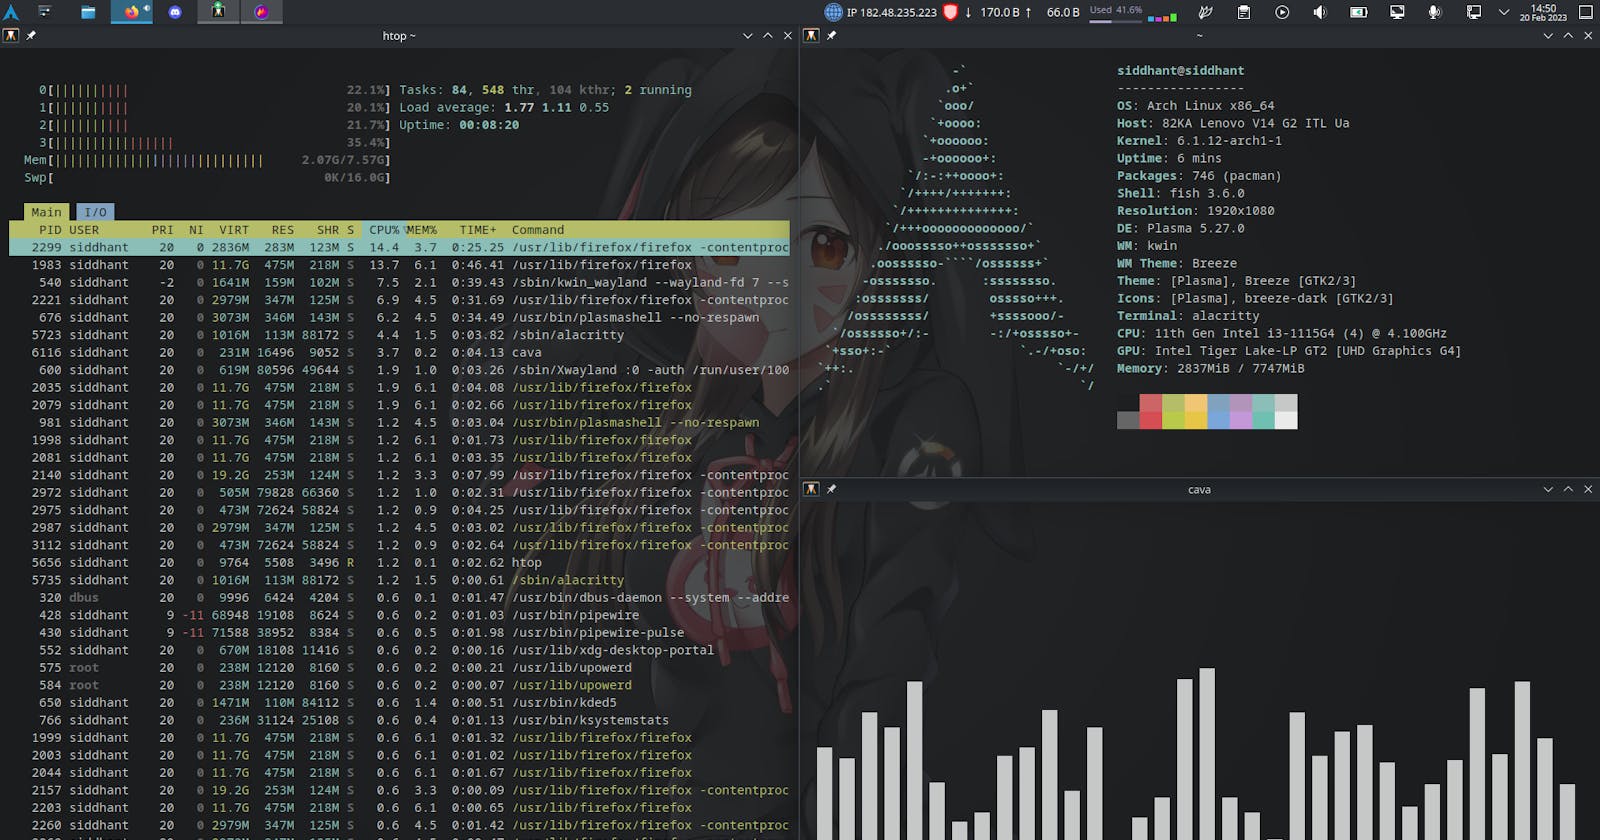 A (pain)less journey into Arch Linux